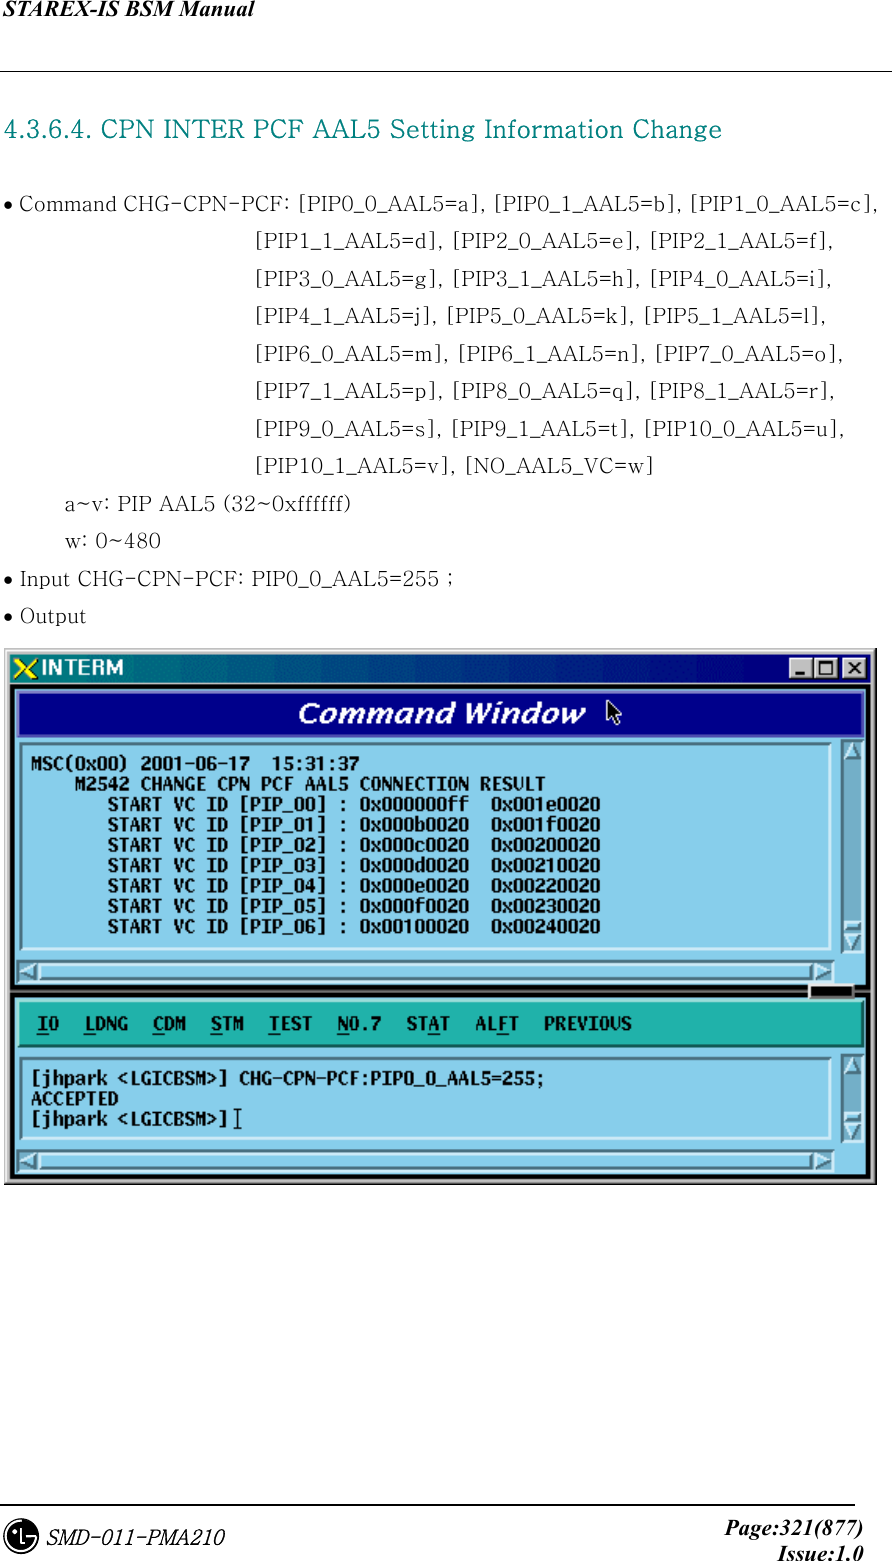 STAREX-IS BSM Manual     Page:321(877)Issue:1.0SMD-011-PMA210  4.3.6.4. CPN INTER PCF AAL5 Setting Information Change  • Command CHG-CPN-PCF: [PIP0_0_AAL5=a], [PIP0_1_AAL5=b], [PIP1_0_AAL5=c],   [PIP1_1_AAL5=d], [PIP2_0_AAL5=e], [PIP2_1_AAL5=f],         [PIP3_0_AAL5=g], [PIP3_1_AAL5=h], [PIP4_0_AAL5=i], [PIP4_1_AAL5=j], [PIP5_0_AAL5=k], [PIP5_1_AAL5=l],         [PIP6_0_AAL5=m], [PIP6_1_AAL5=n], [PIP7_0_AAL5=o],         [PIP7_1_AAL5=p], [PIP8_0_AAL5=q], [PIP8_1_AAL5=r],         [PIP9_0_AAL5=s], [PIP9_1_AAL5=t], [PIP10_0_AAL5=u],         [PIP10_1_AAL5=v], [NO_AAL5_VC=w] a~v: PIP AAL5 (32~0xffffff) w: 0~480 • Input CHG-CPN-PCF: PIP0_0_AAL5=255 ; • Output  